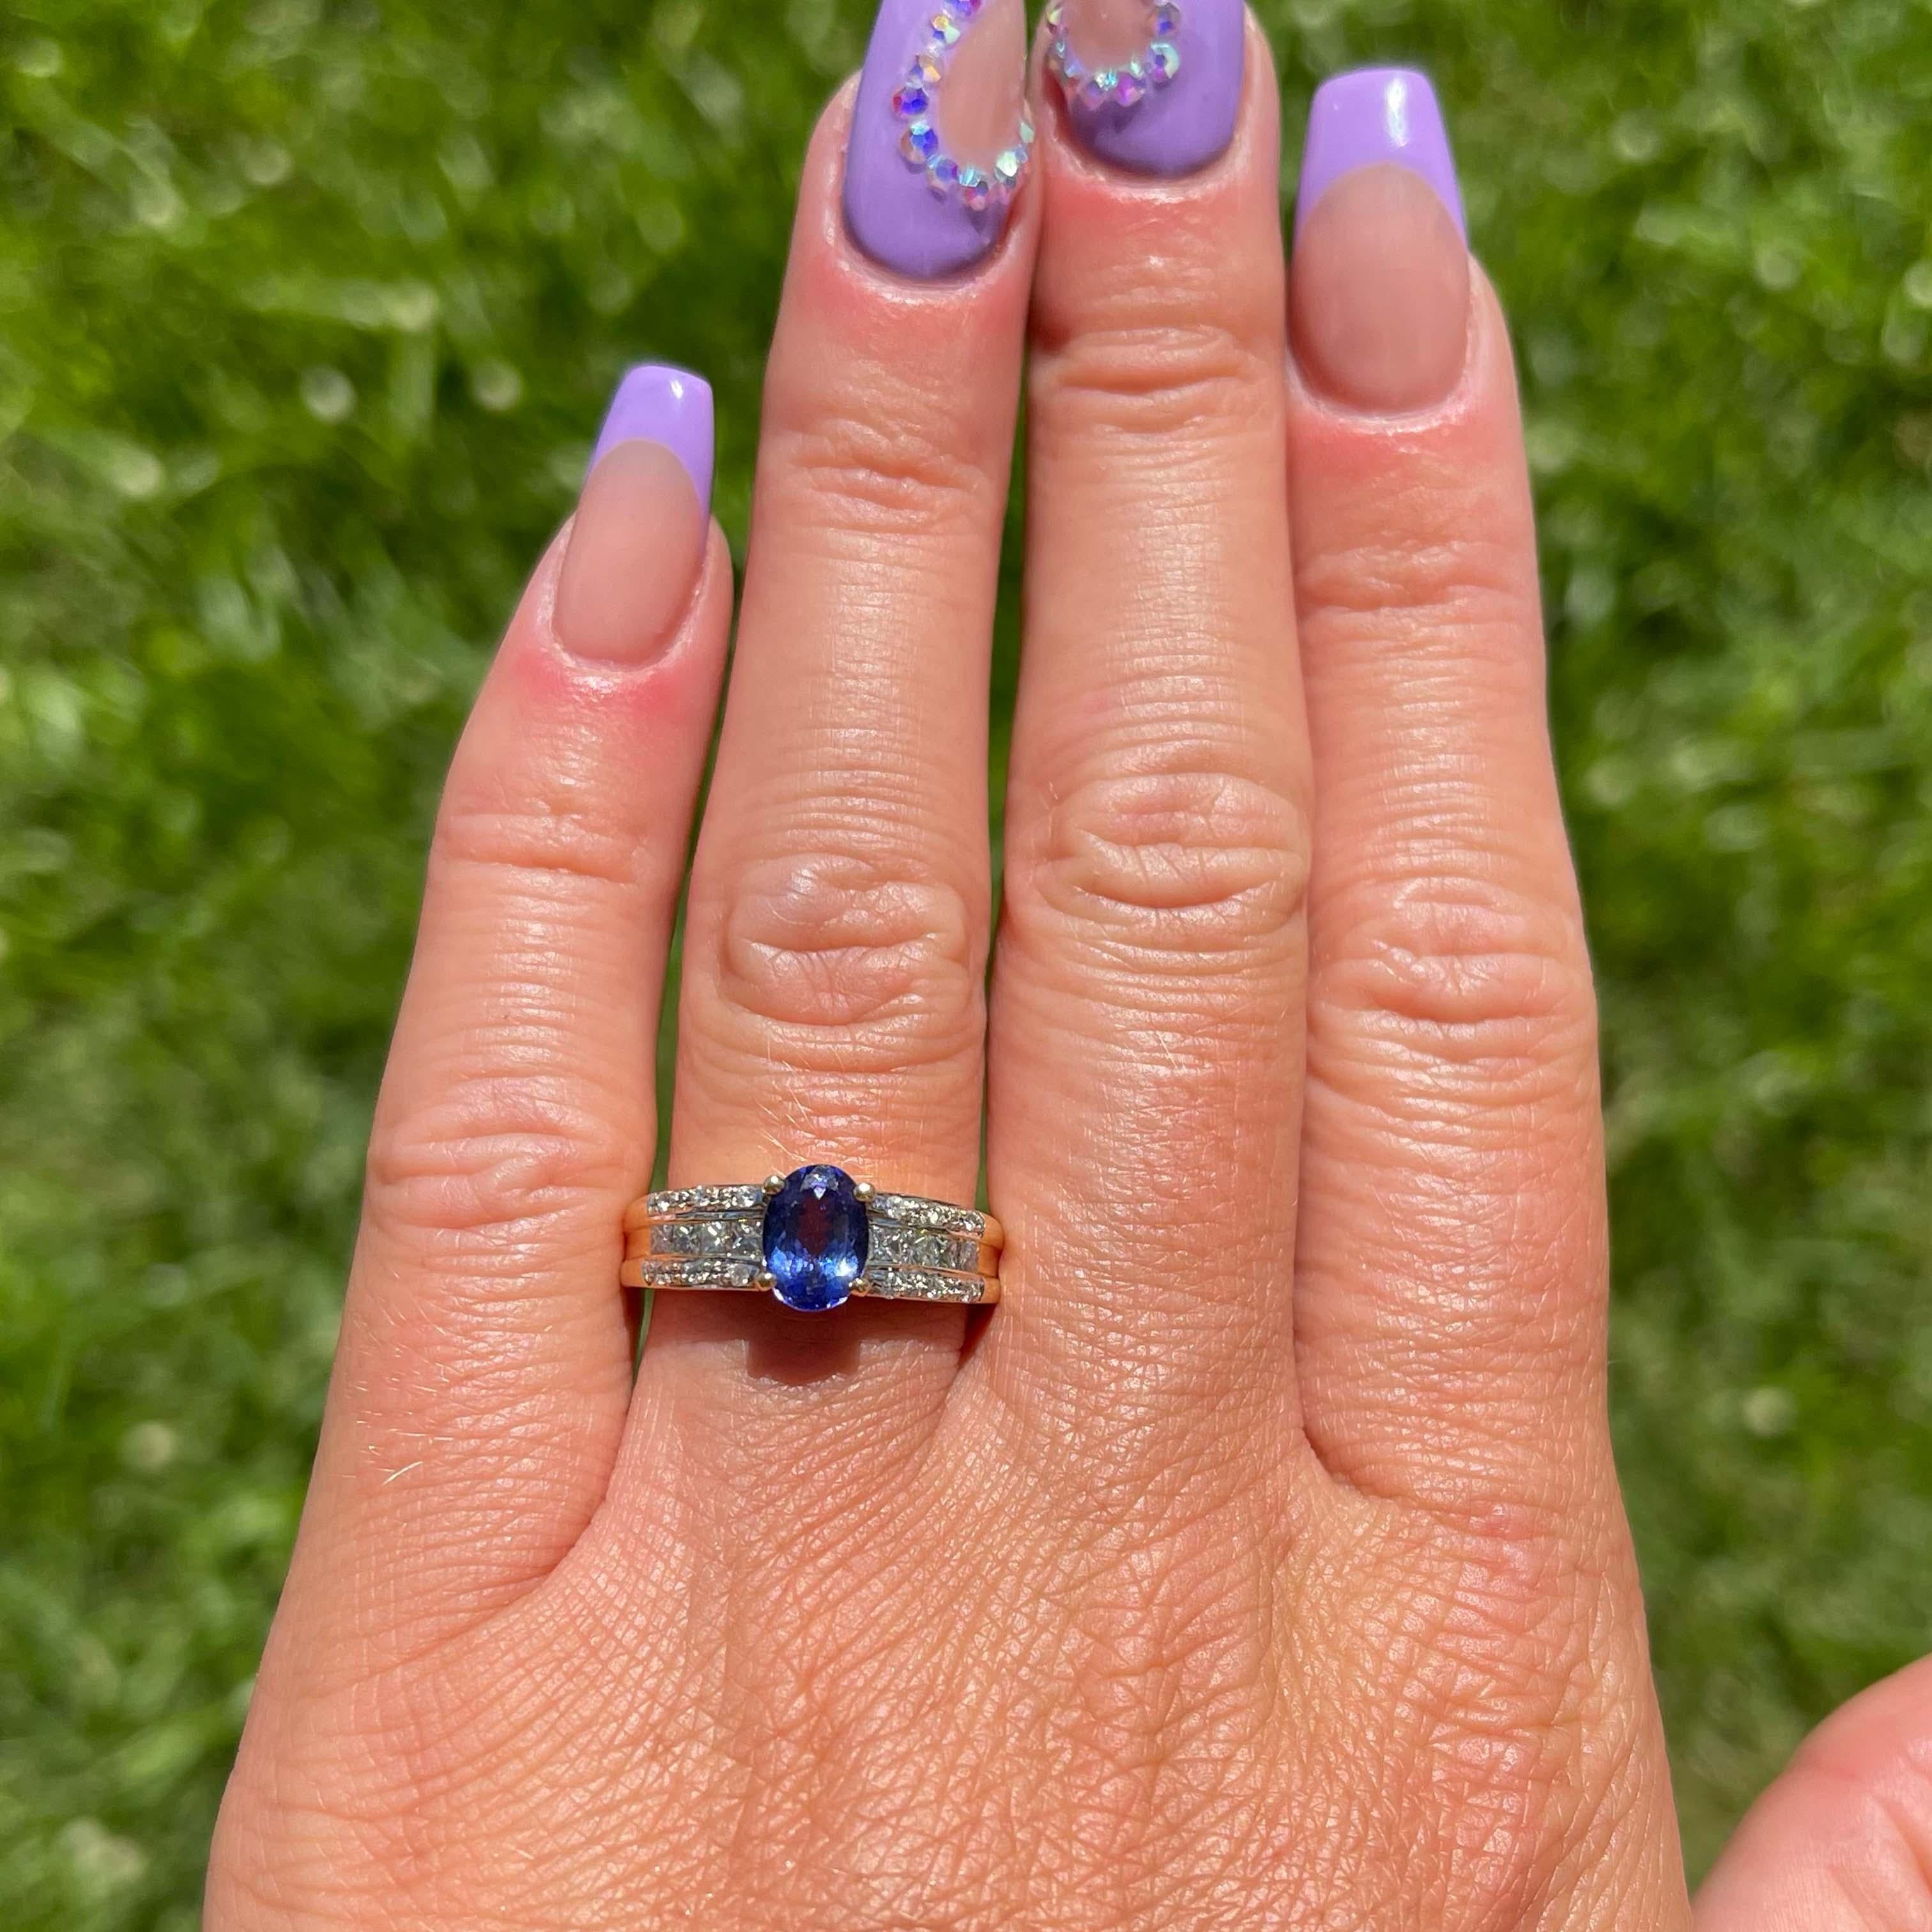 Blue Purple Tanzanite and Diamond Ring-18k Yellow Gold. Featuring a deep bluish purple color, oval shape Tanzanite, measuring approximately 7.55mm x 5.44mm x 3.51mm with an estimated total weight of 0.90 carats. The ring is set with 3 rows of